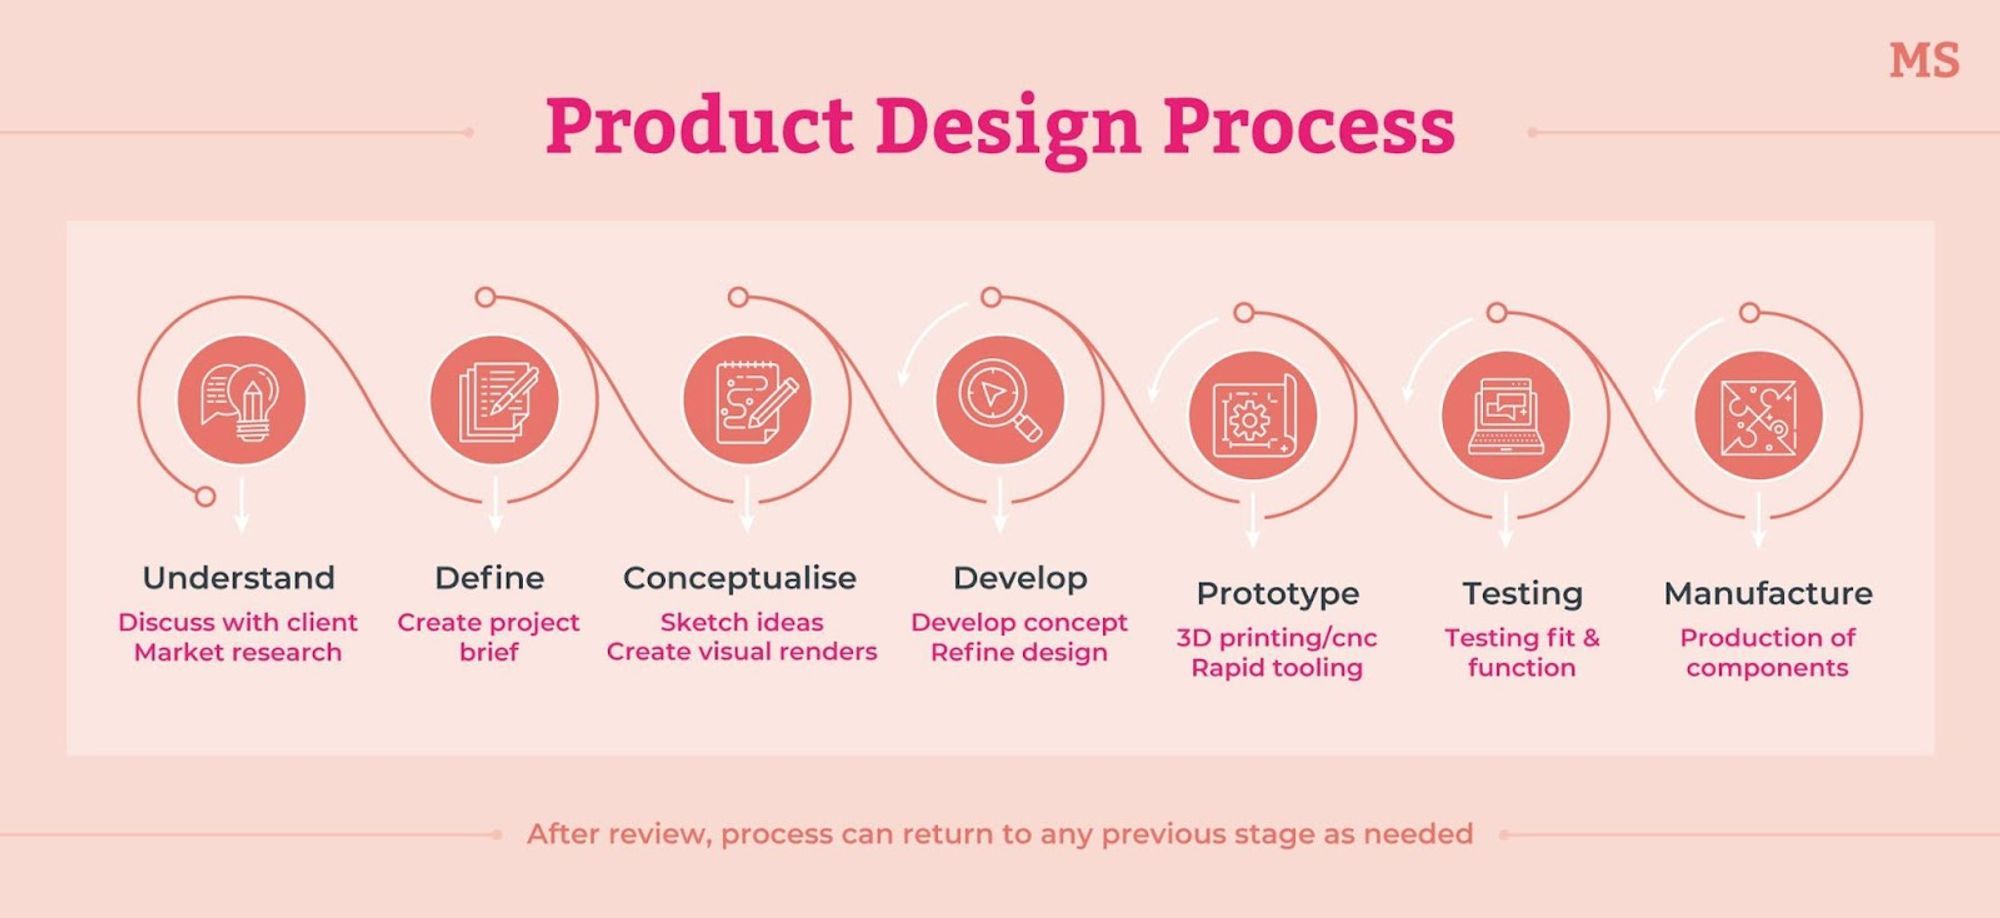 The product design process